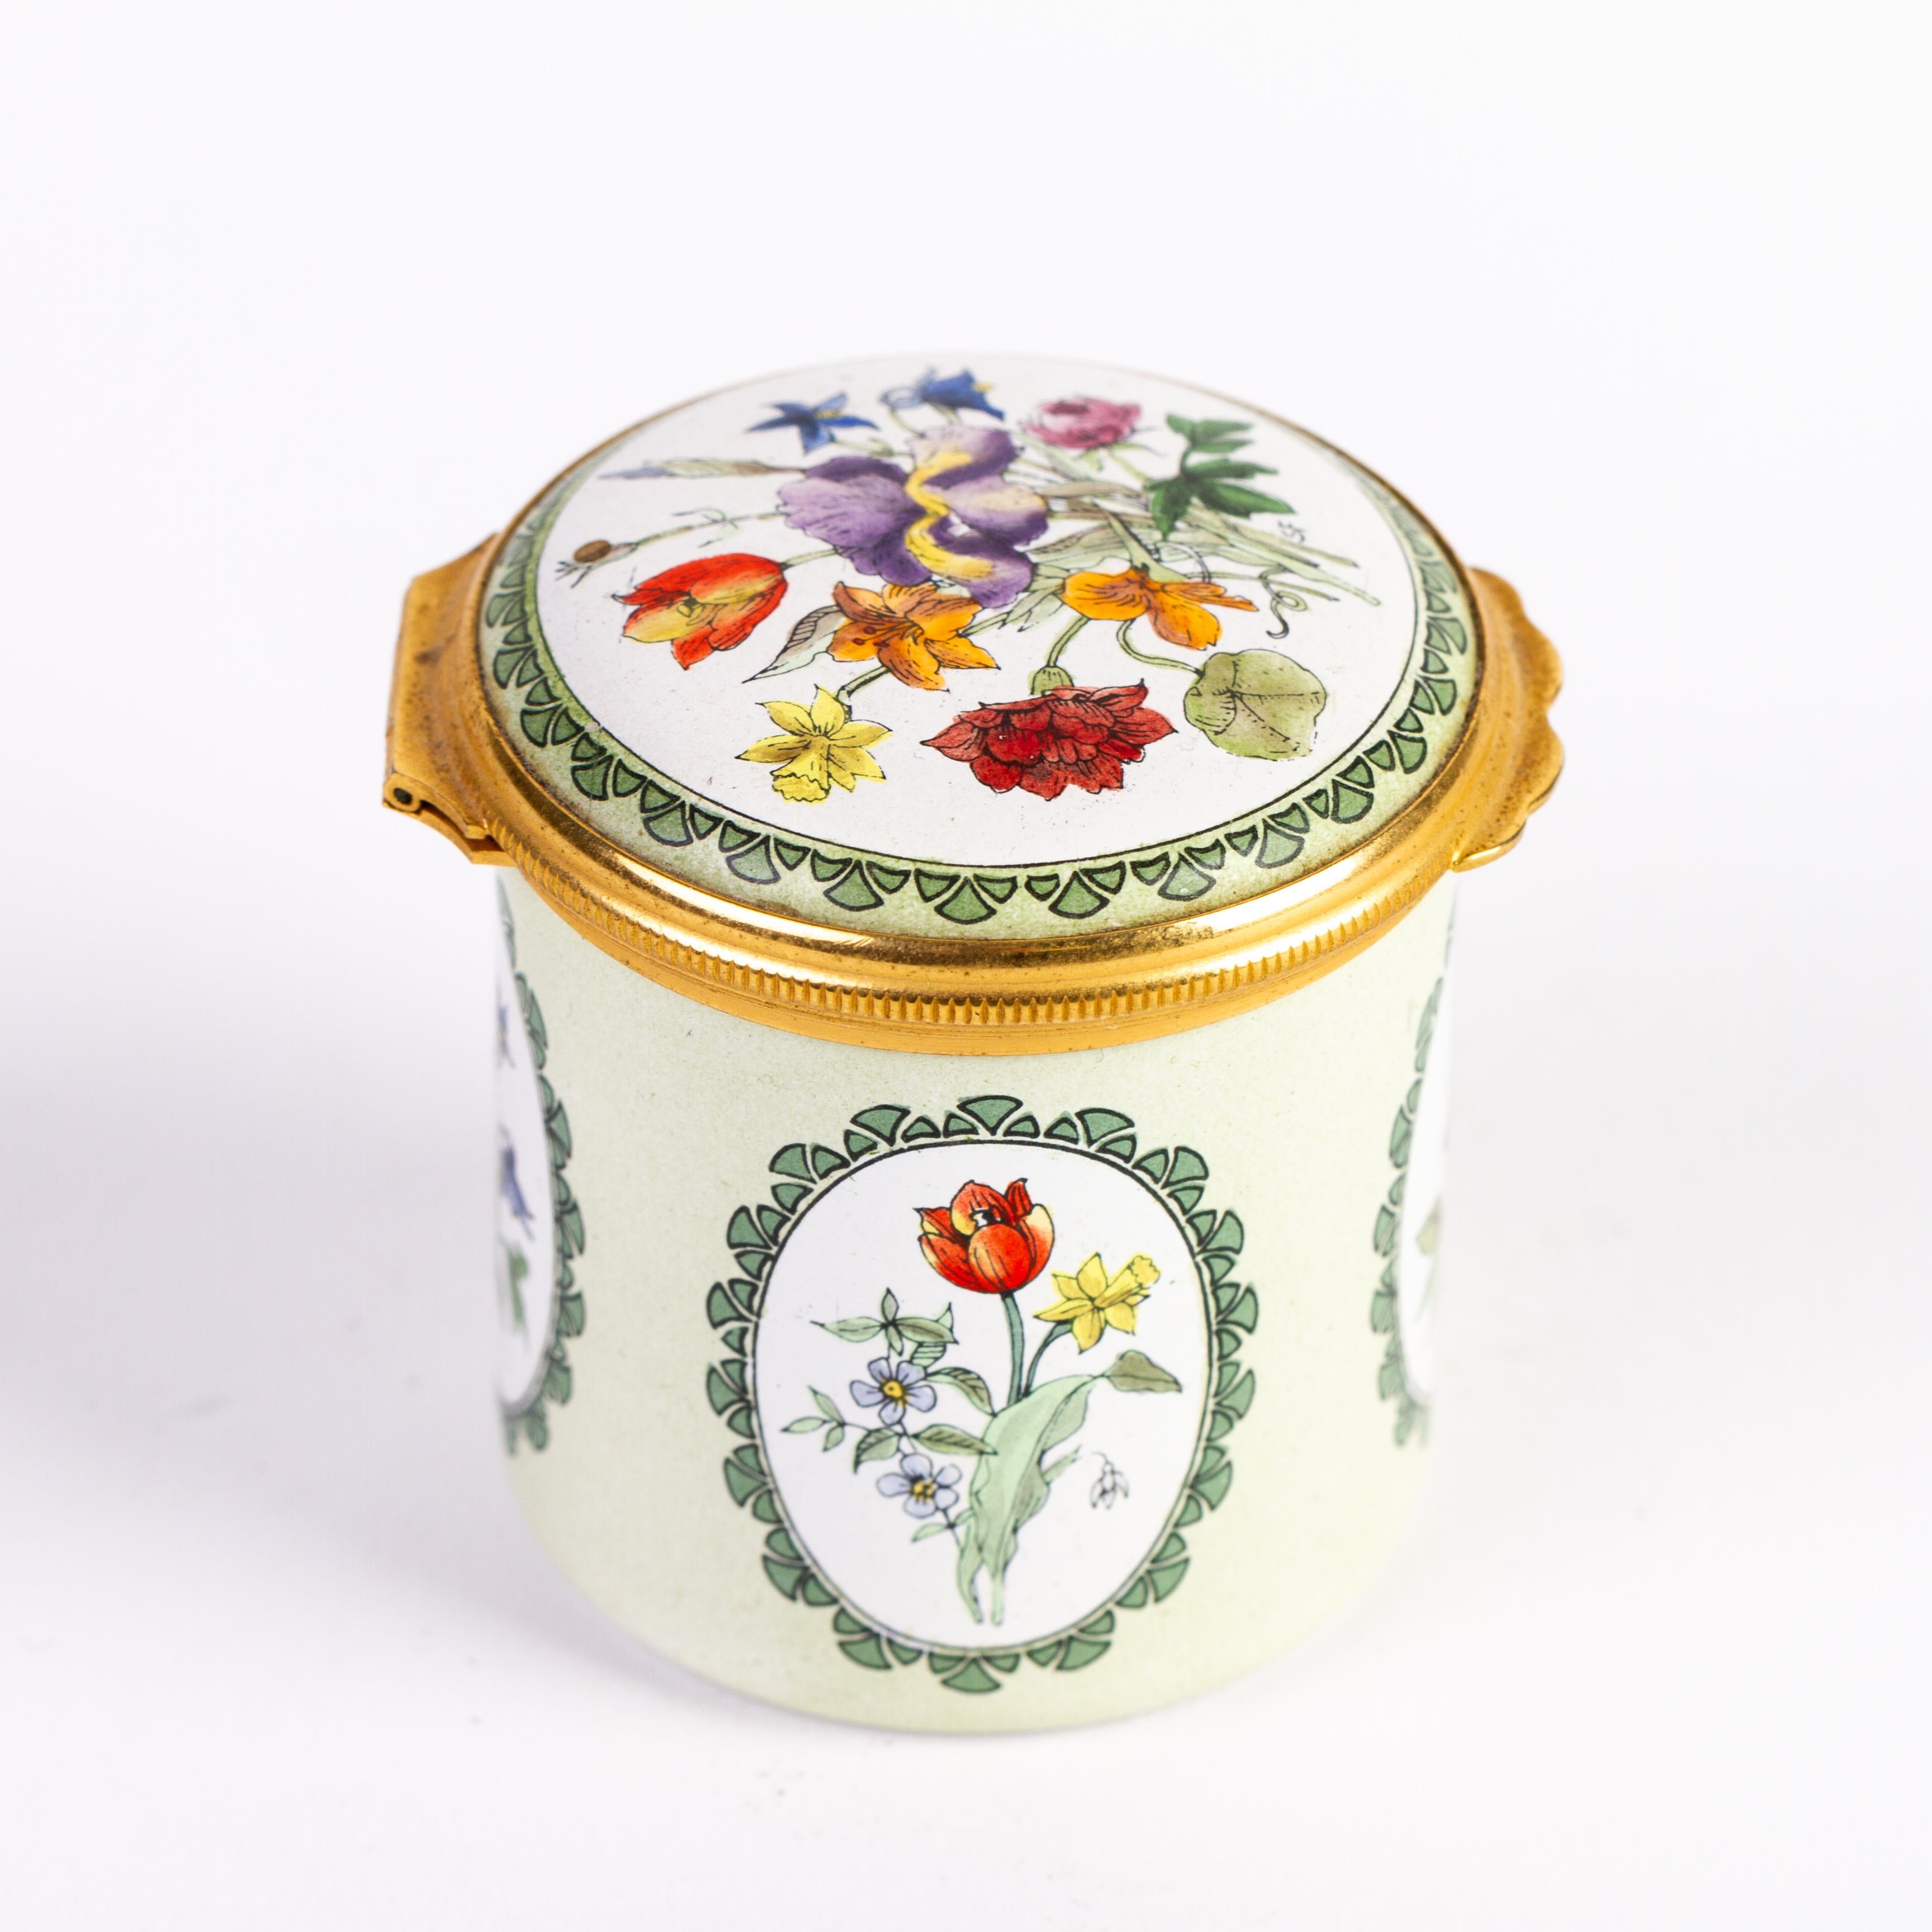 From a private collection.
Free international shipping.
Halcyon Days Fine Enamel British Pillbox 